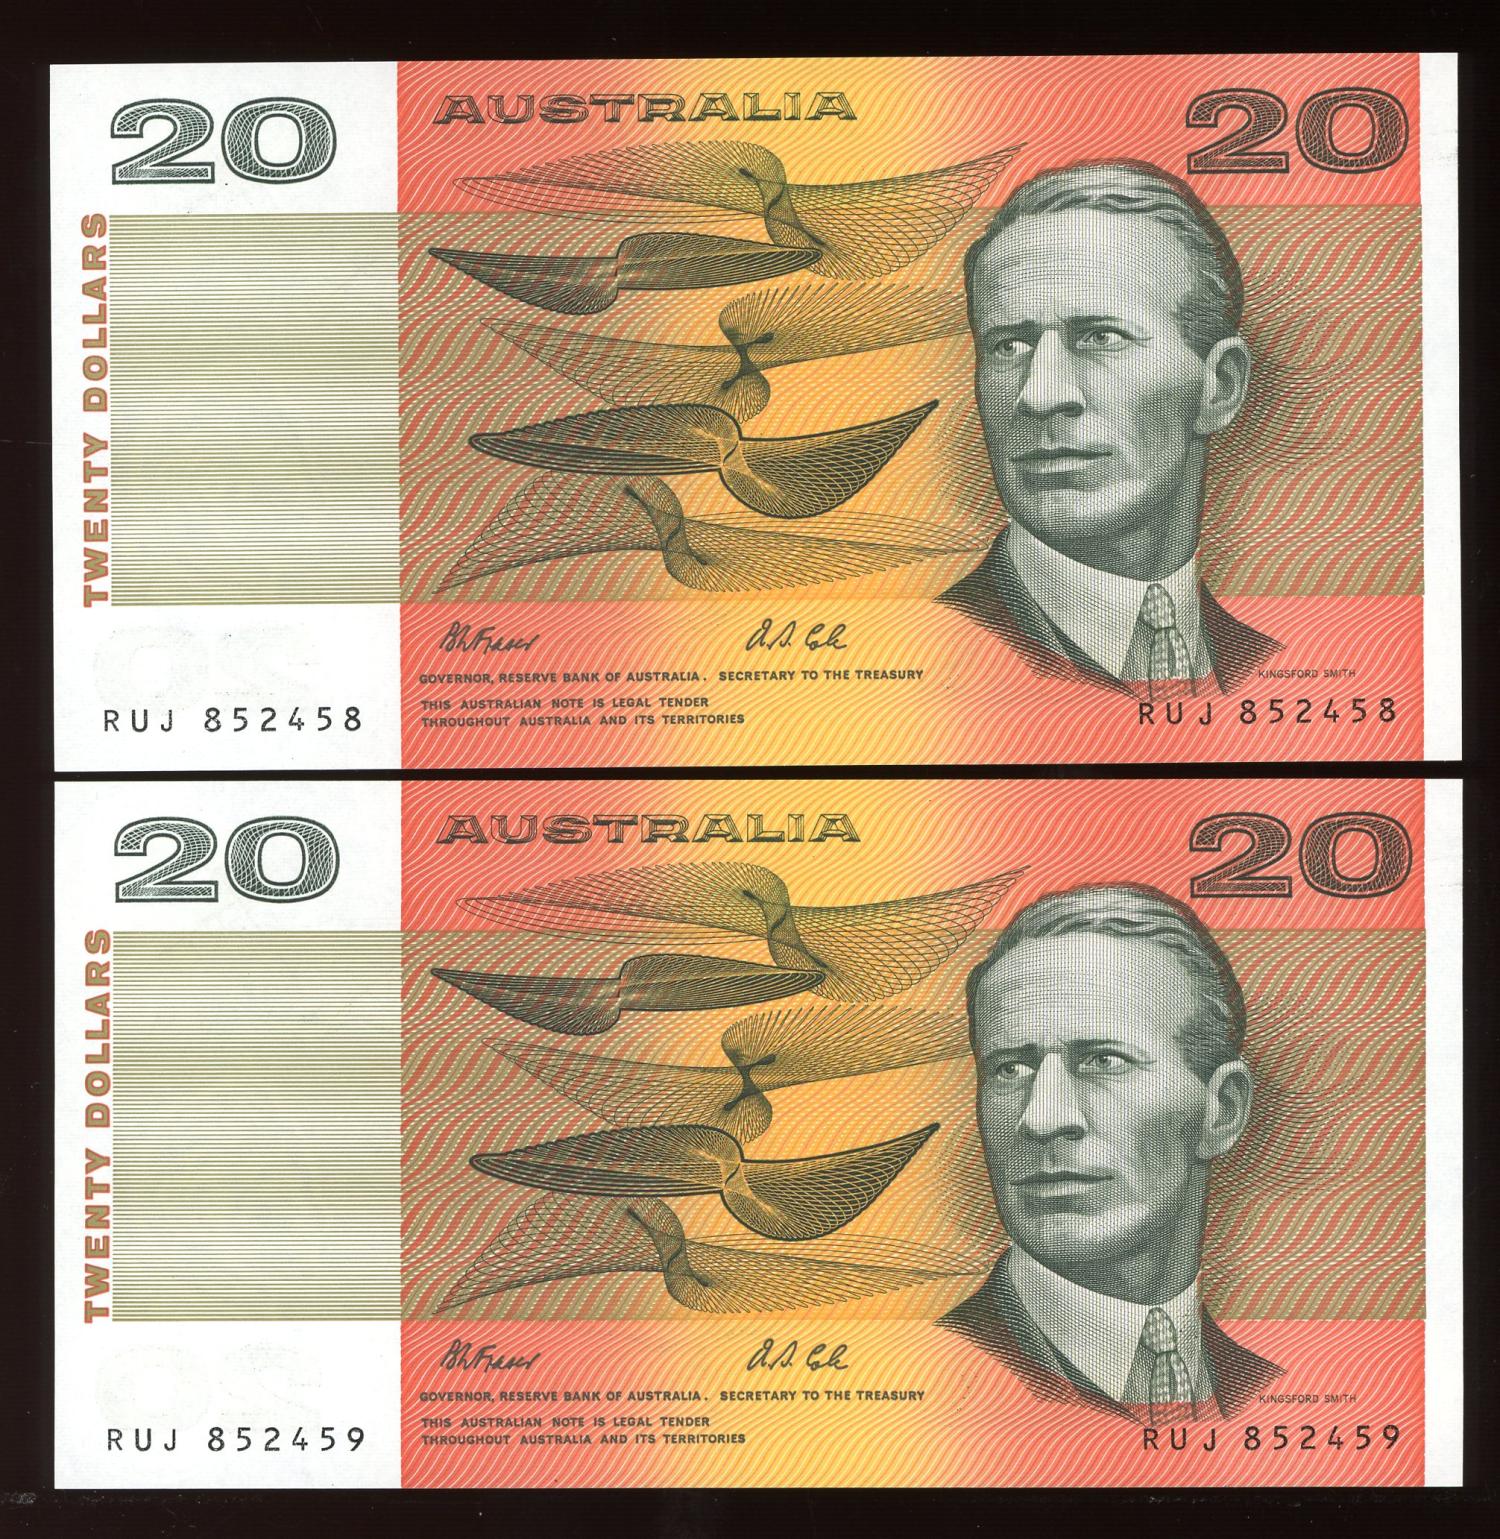 Thumbnail for 1991 $20 Pair Fraser Cole RUJ 852458-59 UNC